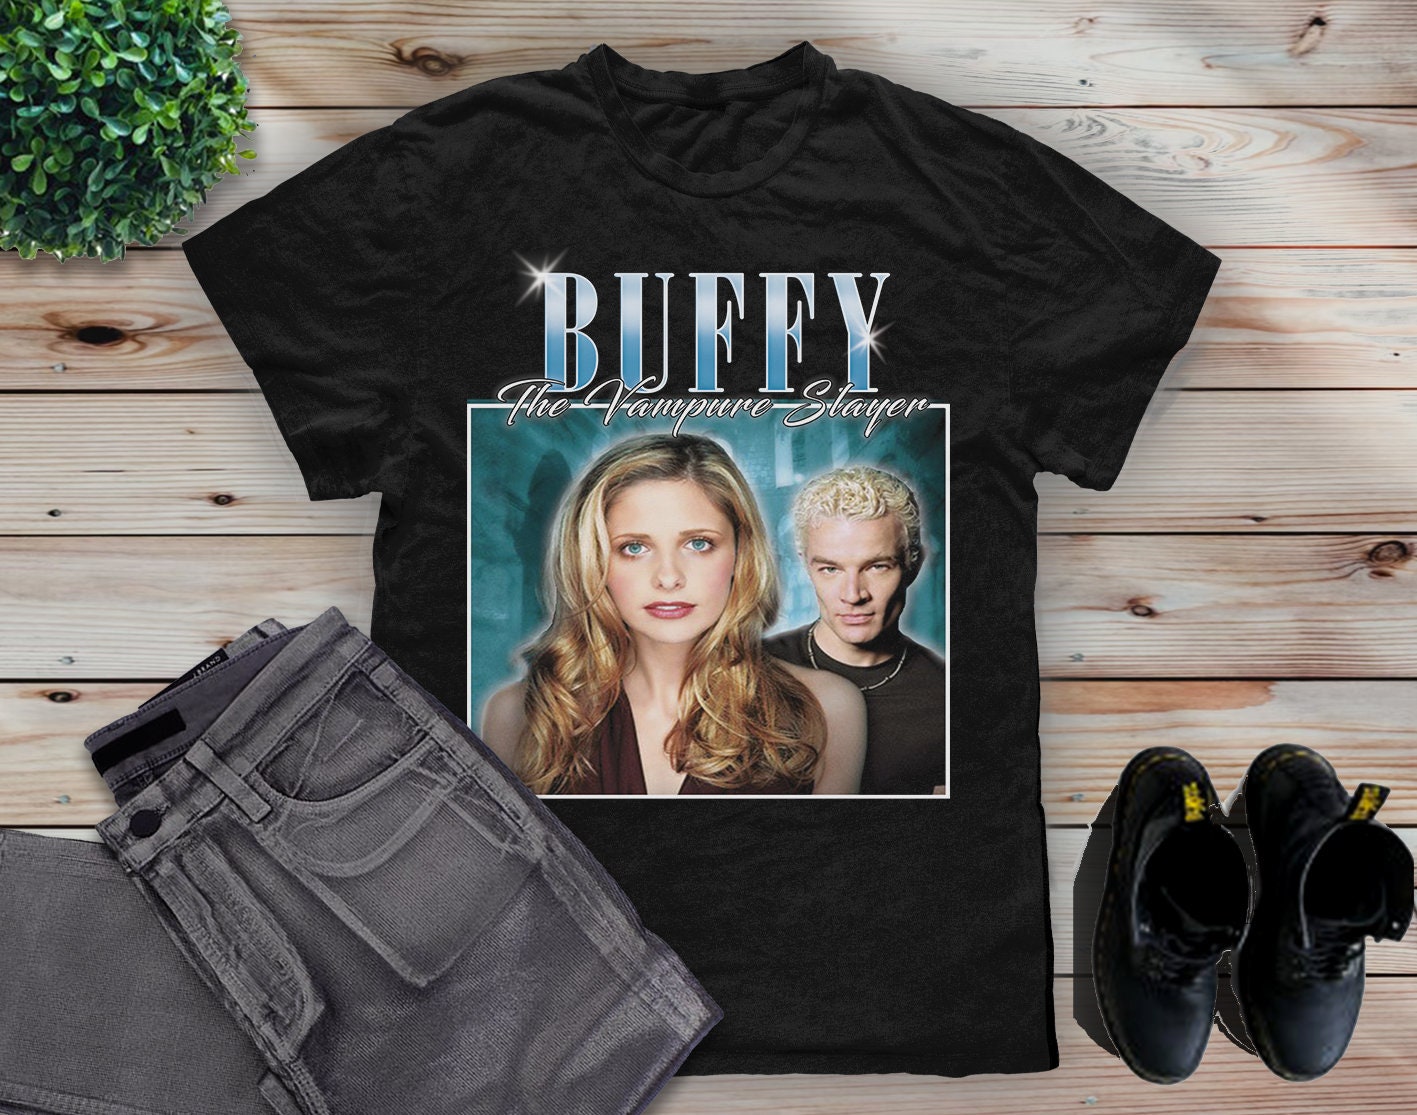 Discover Buffy the Vampire Slayer T-Shirt